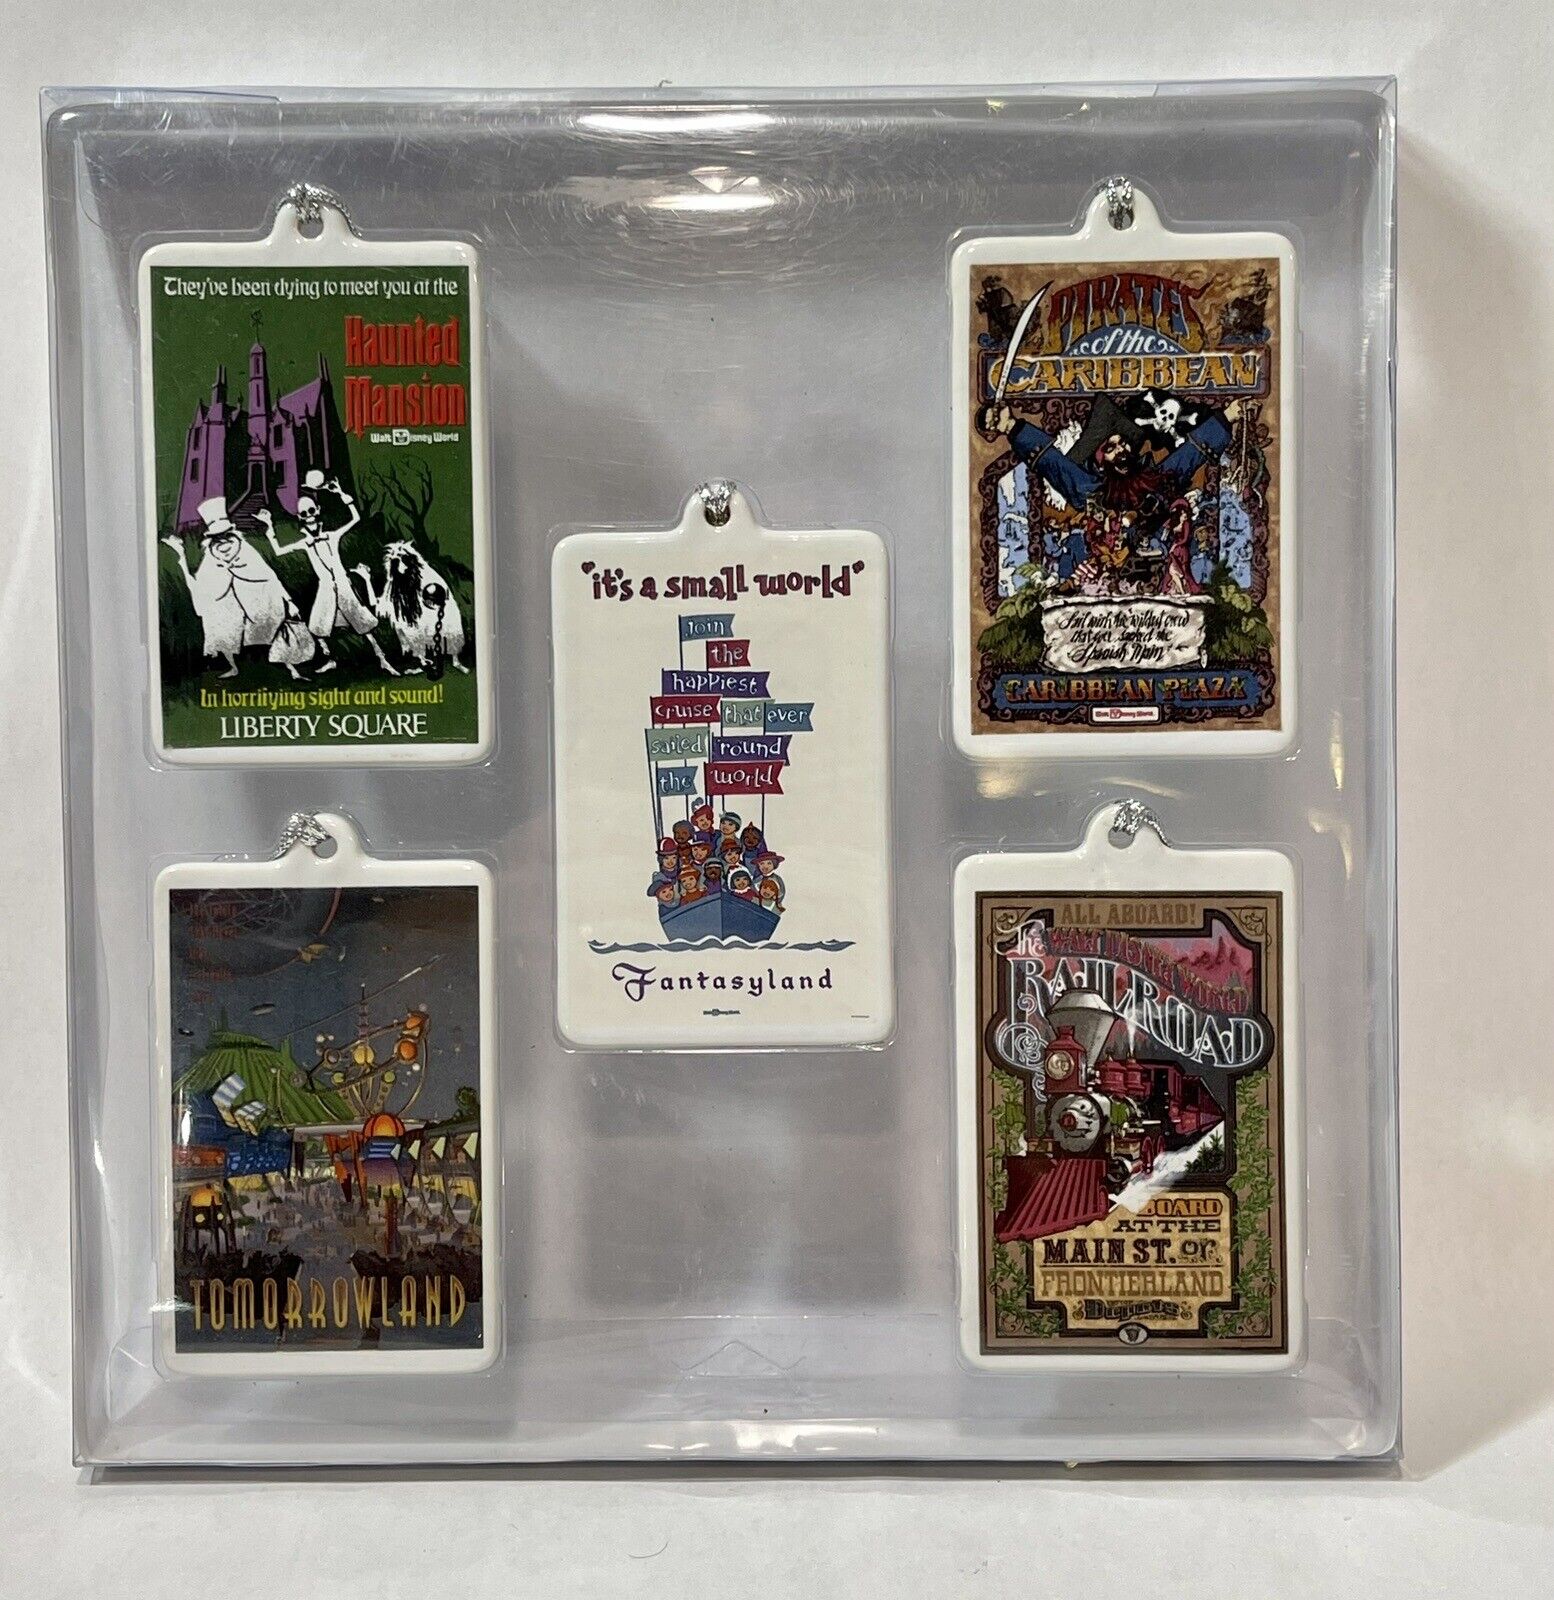 DISNEY 35th Anniversary Commemorative Ornaments Holiday Collection SET OF 5 2006